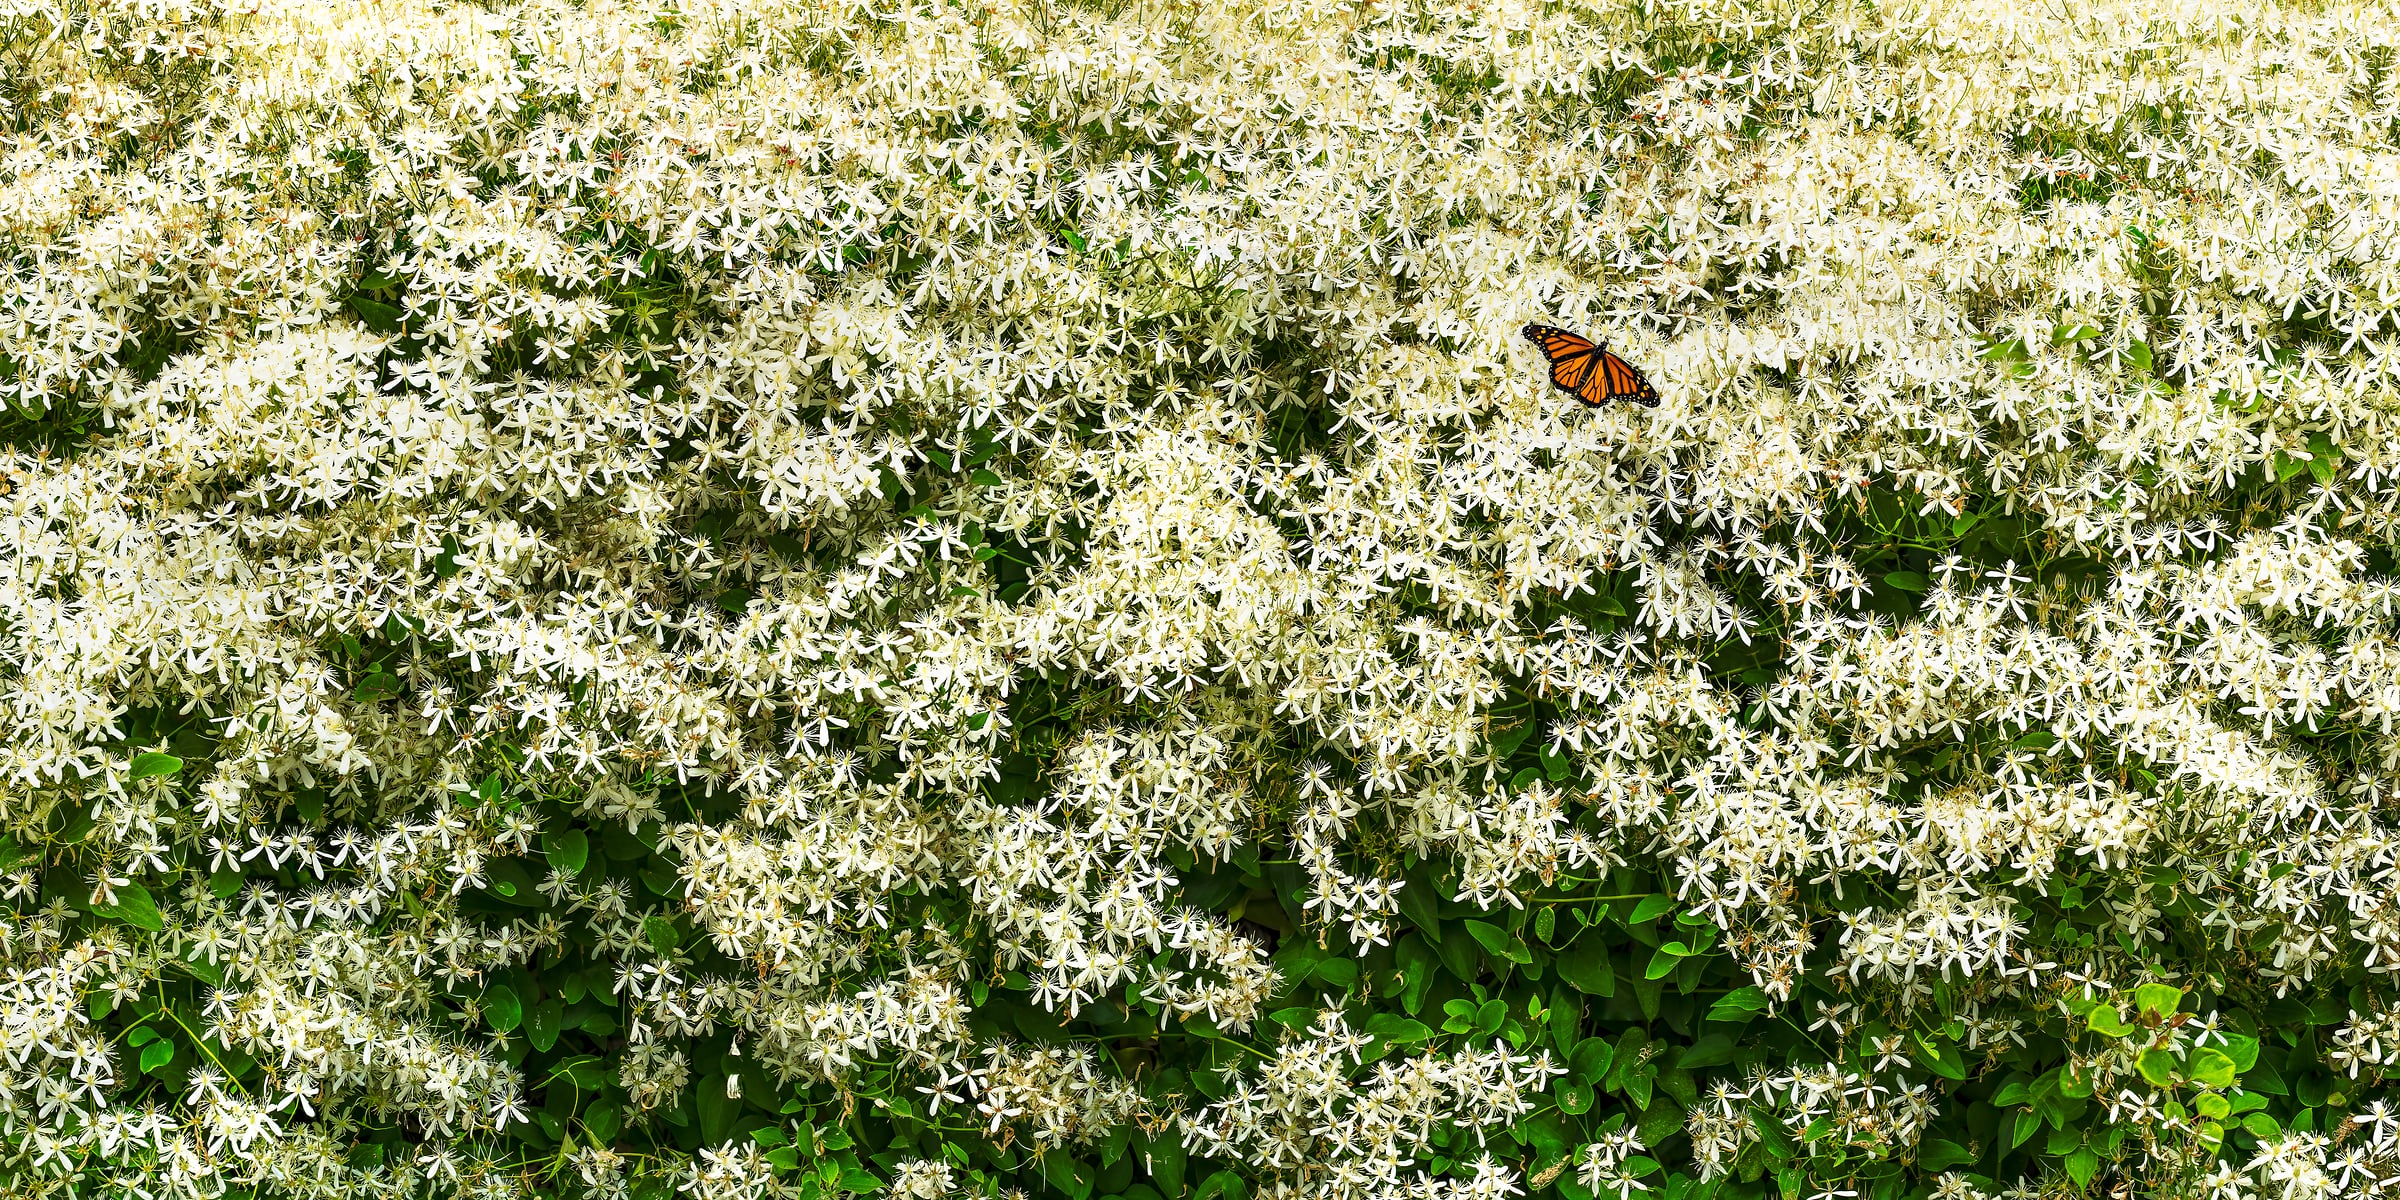 233 megapixels! A very high resolution, large-format VAST photo print of a monarch butterfly on white flowers; nature photograph created by David David.